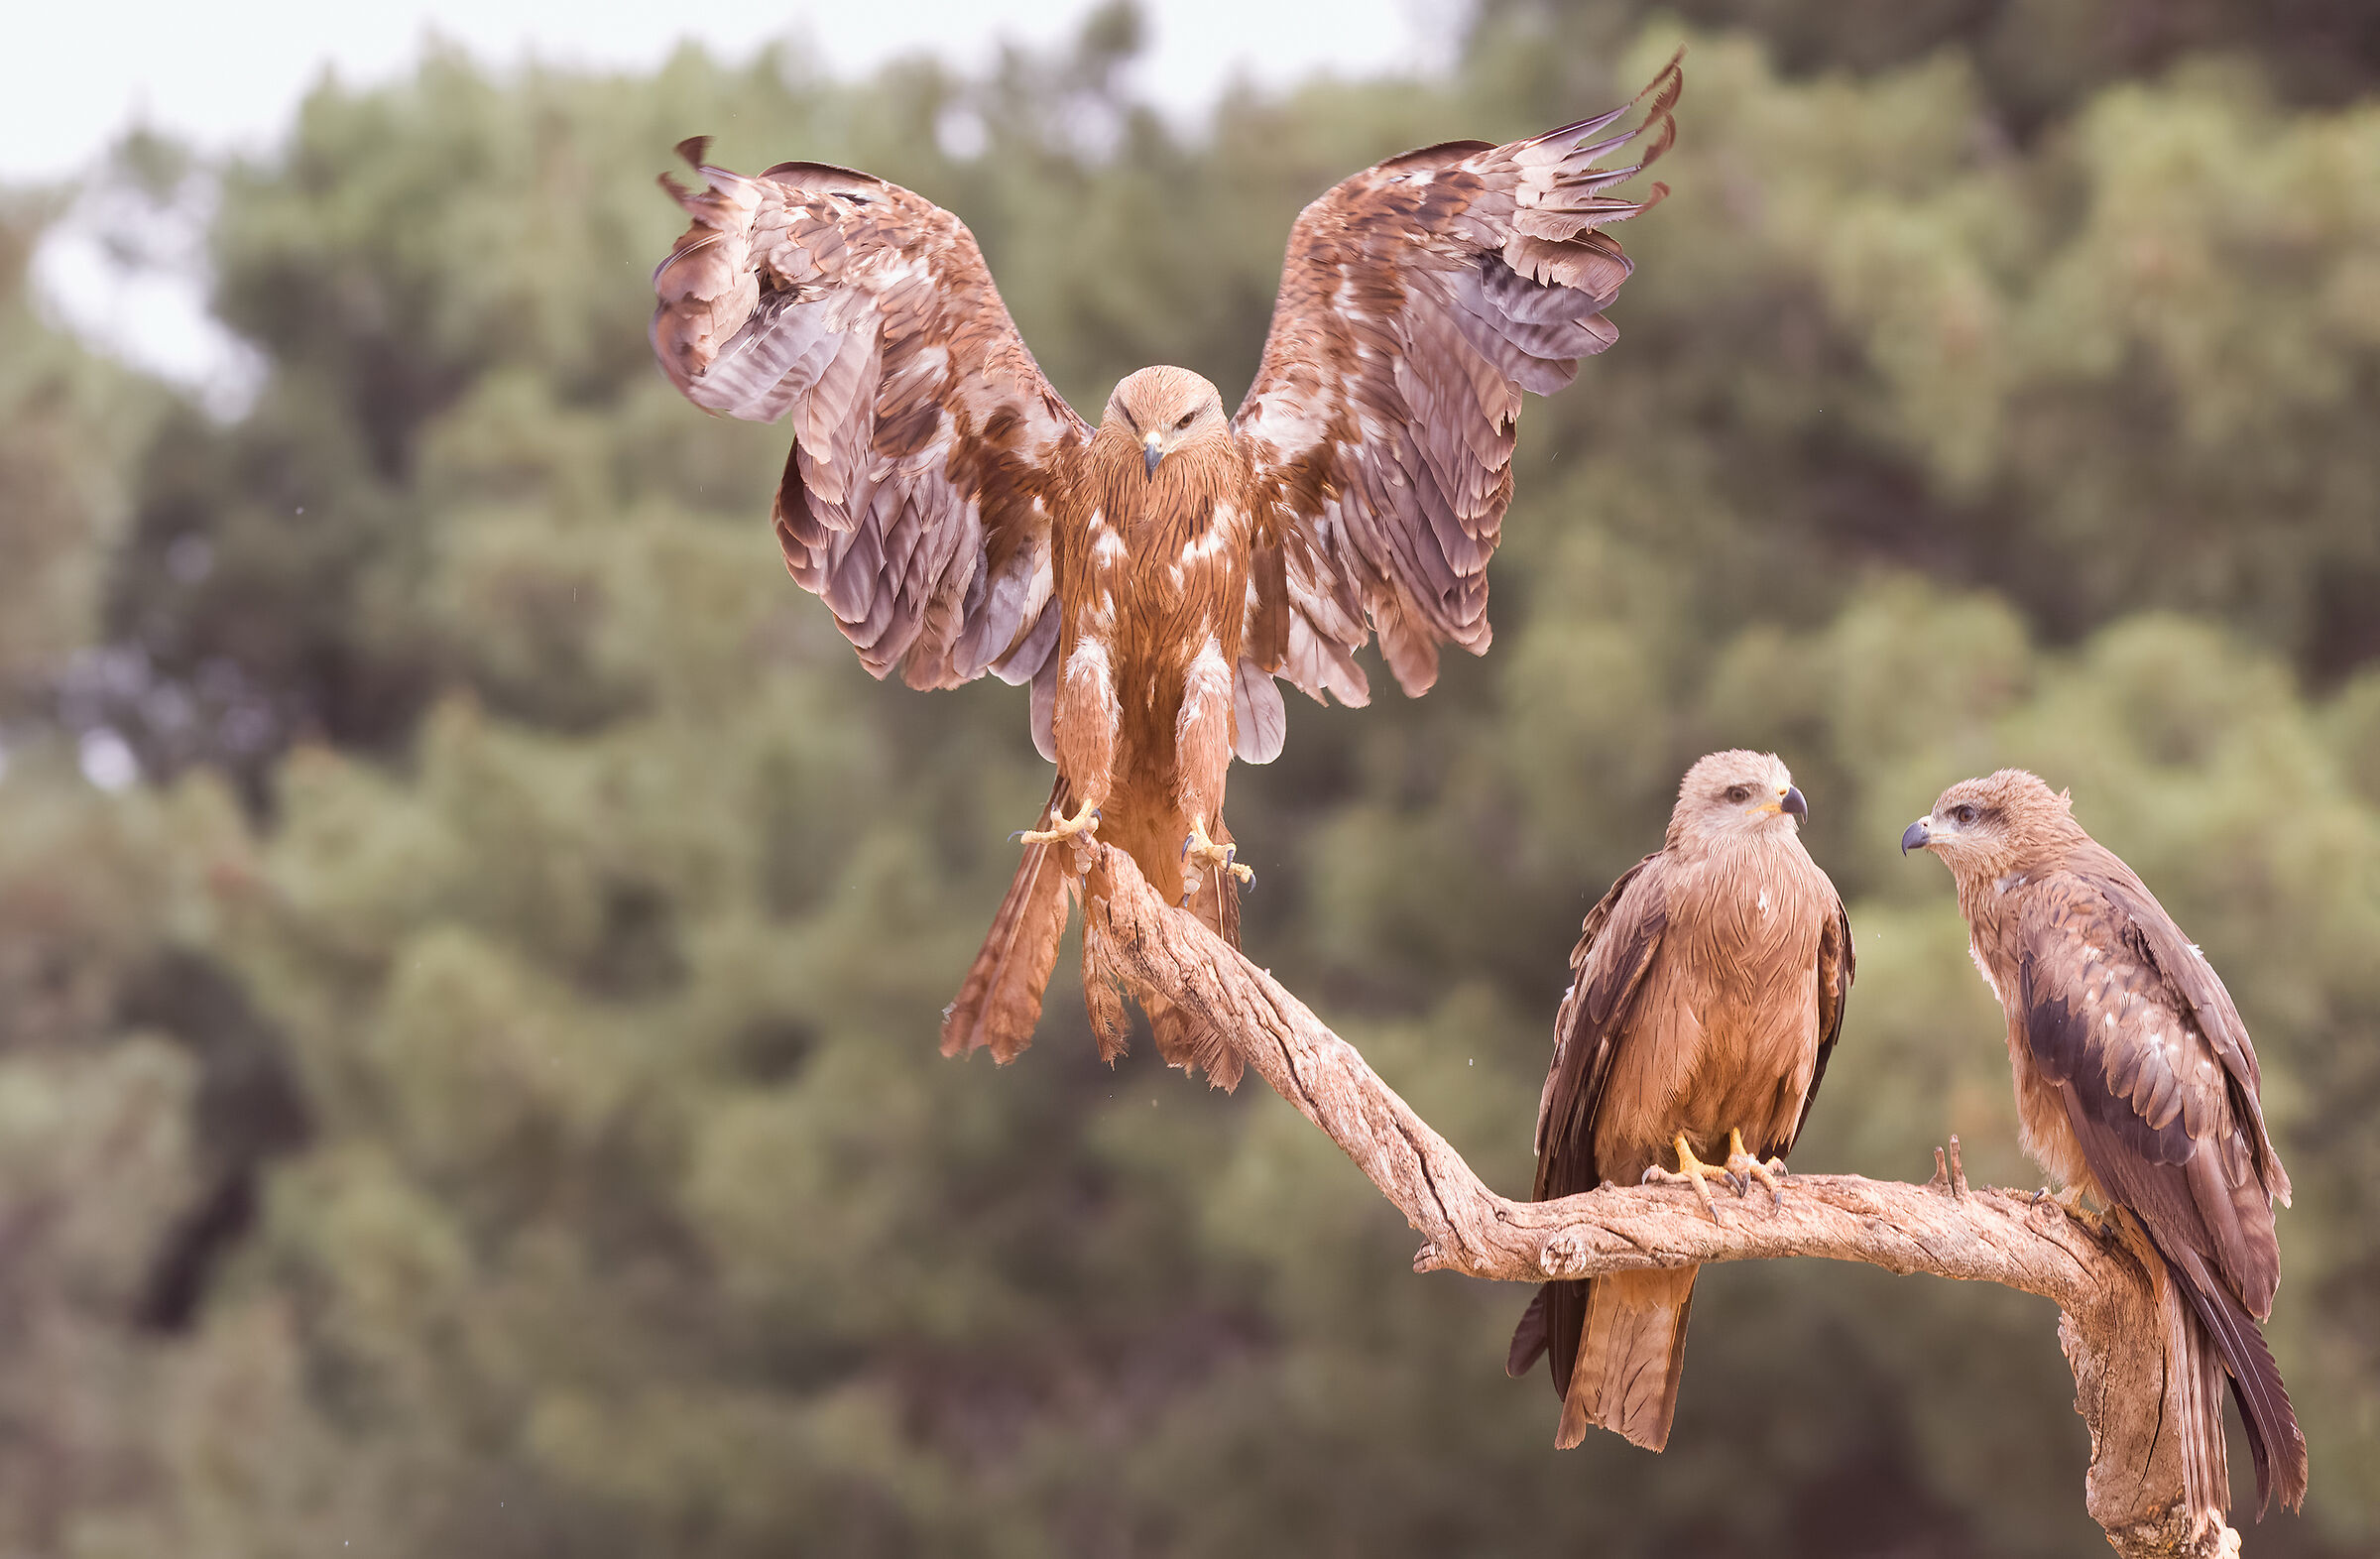 There is no two without three - Brown kites...